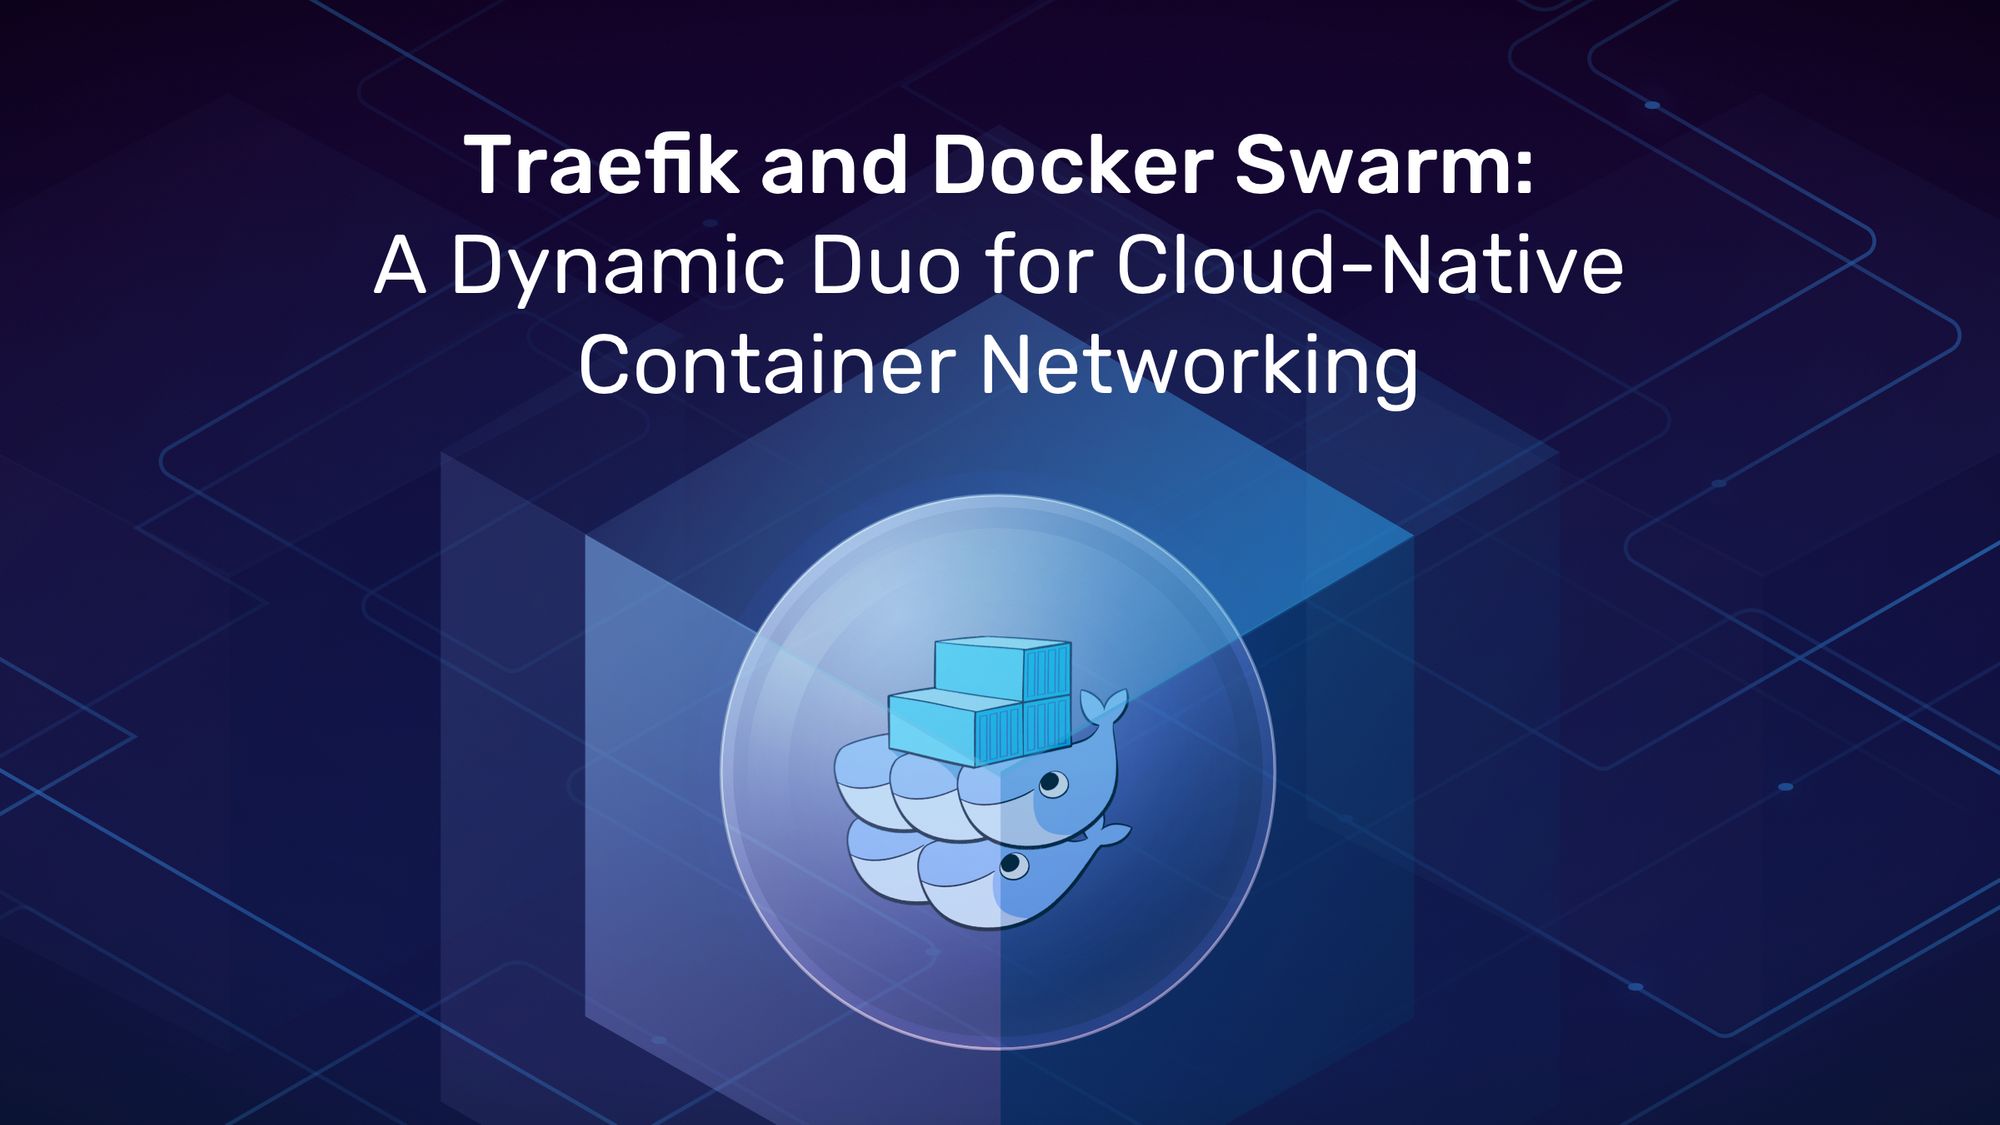 Traefik and Docker Swarm: A Dynamic Duo for Cloud-Native Container Networking